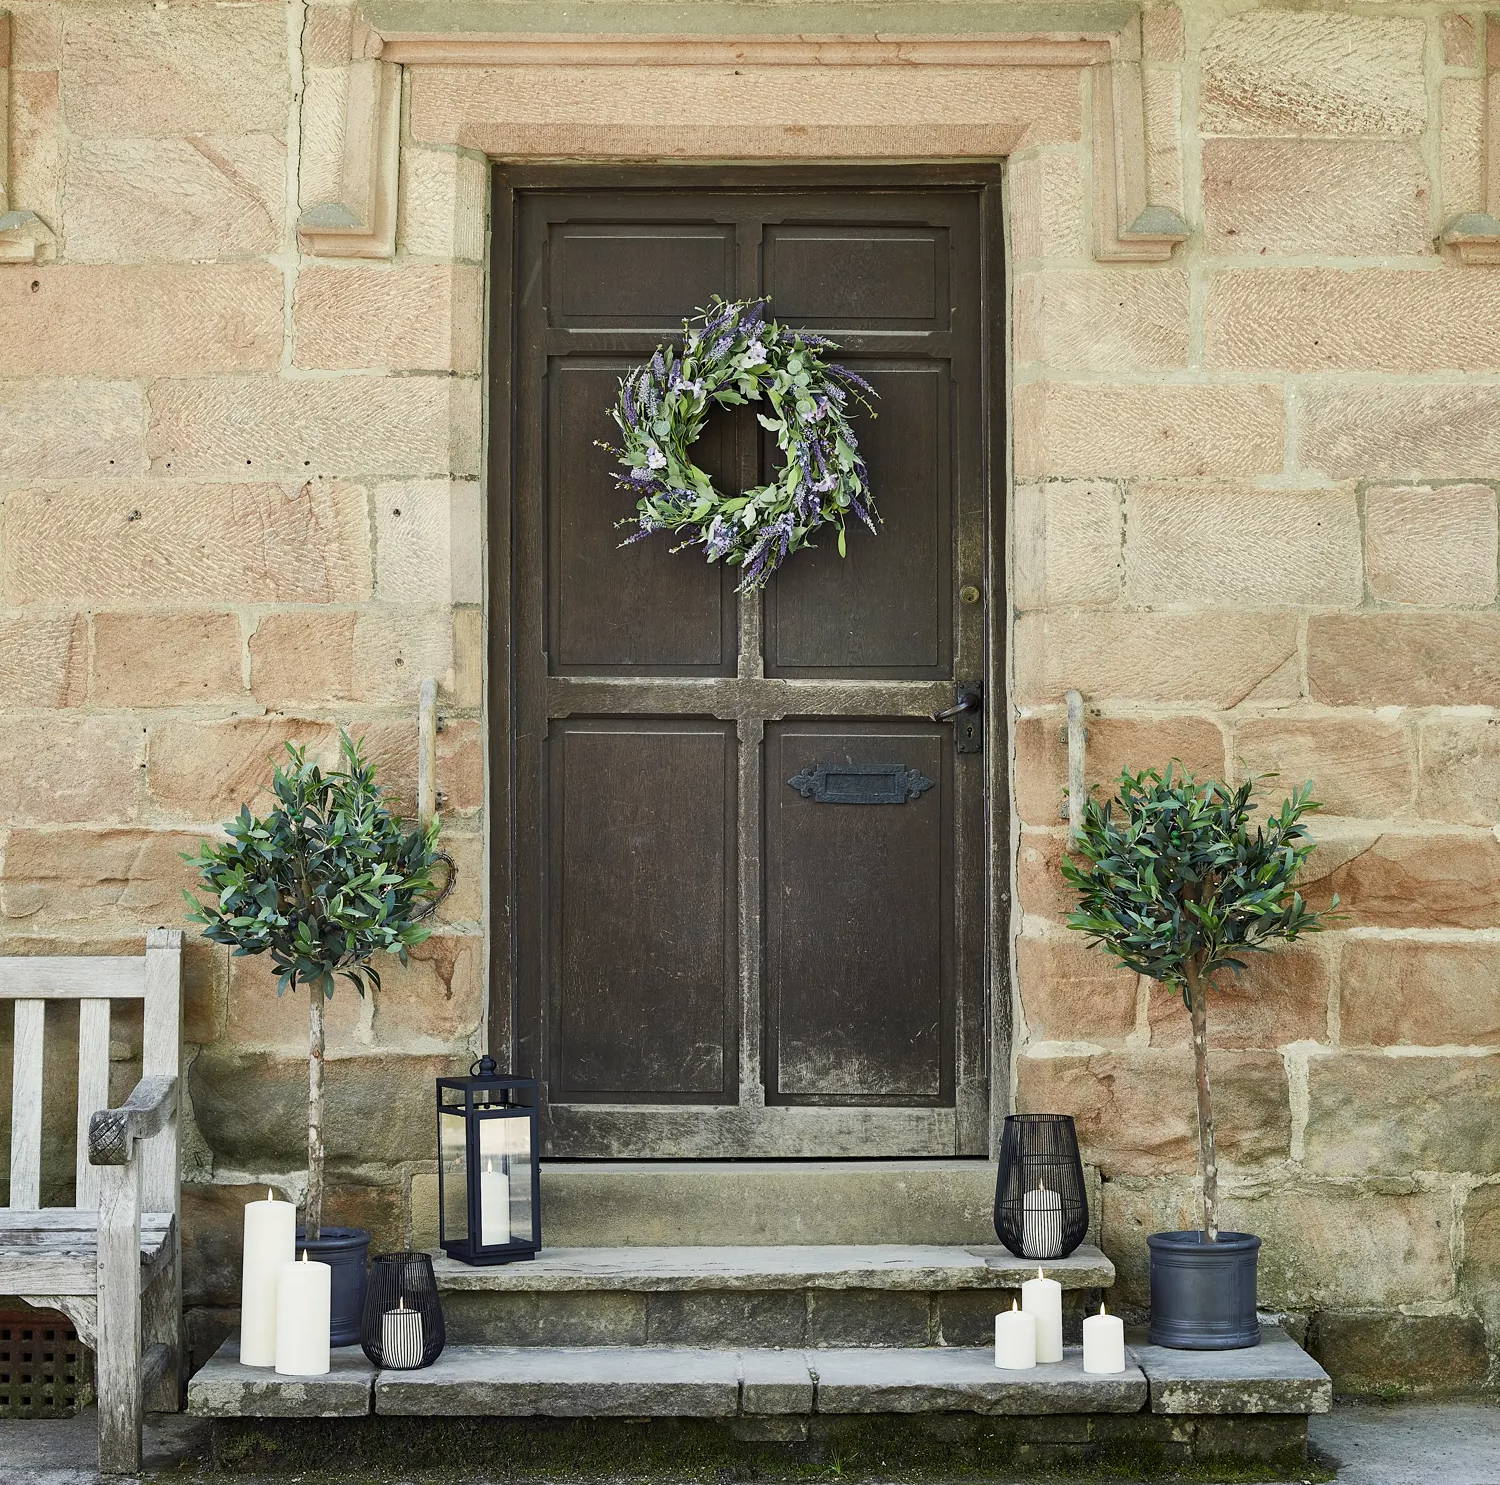 Summer doorway with a lavender wreath and lanterns with 2 shrubs besides the door.